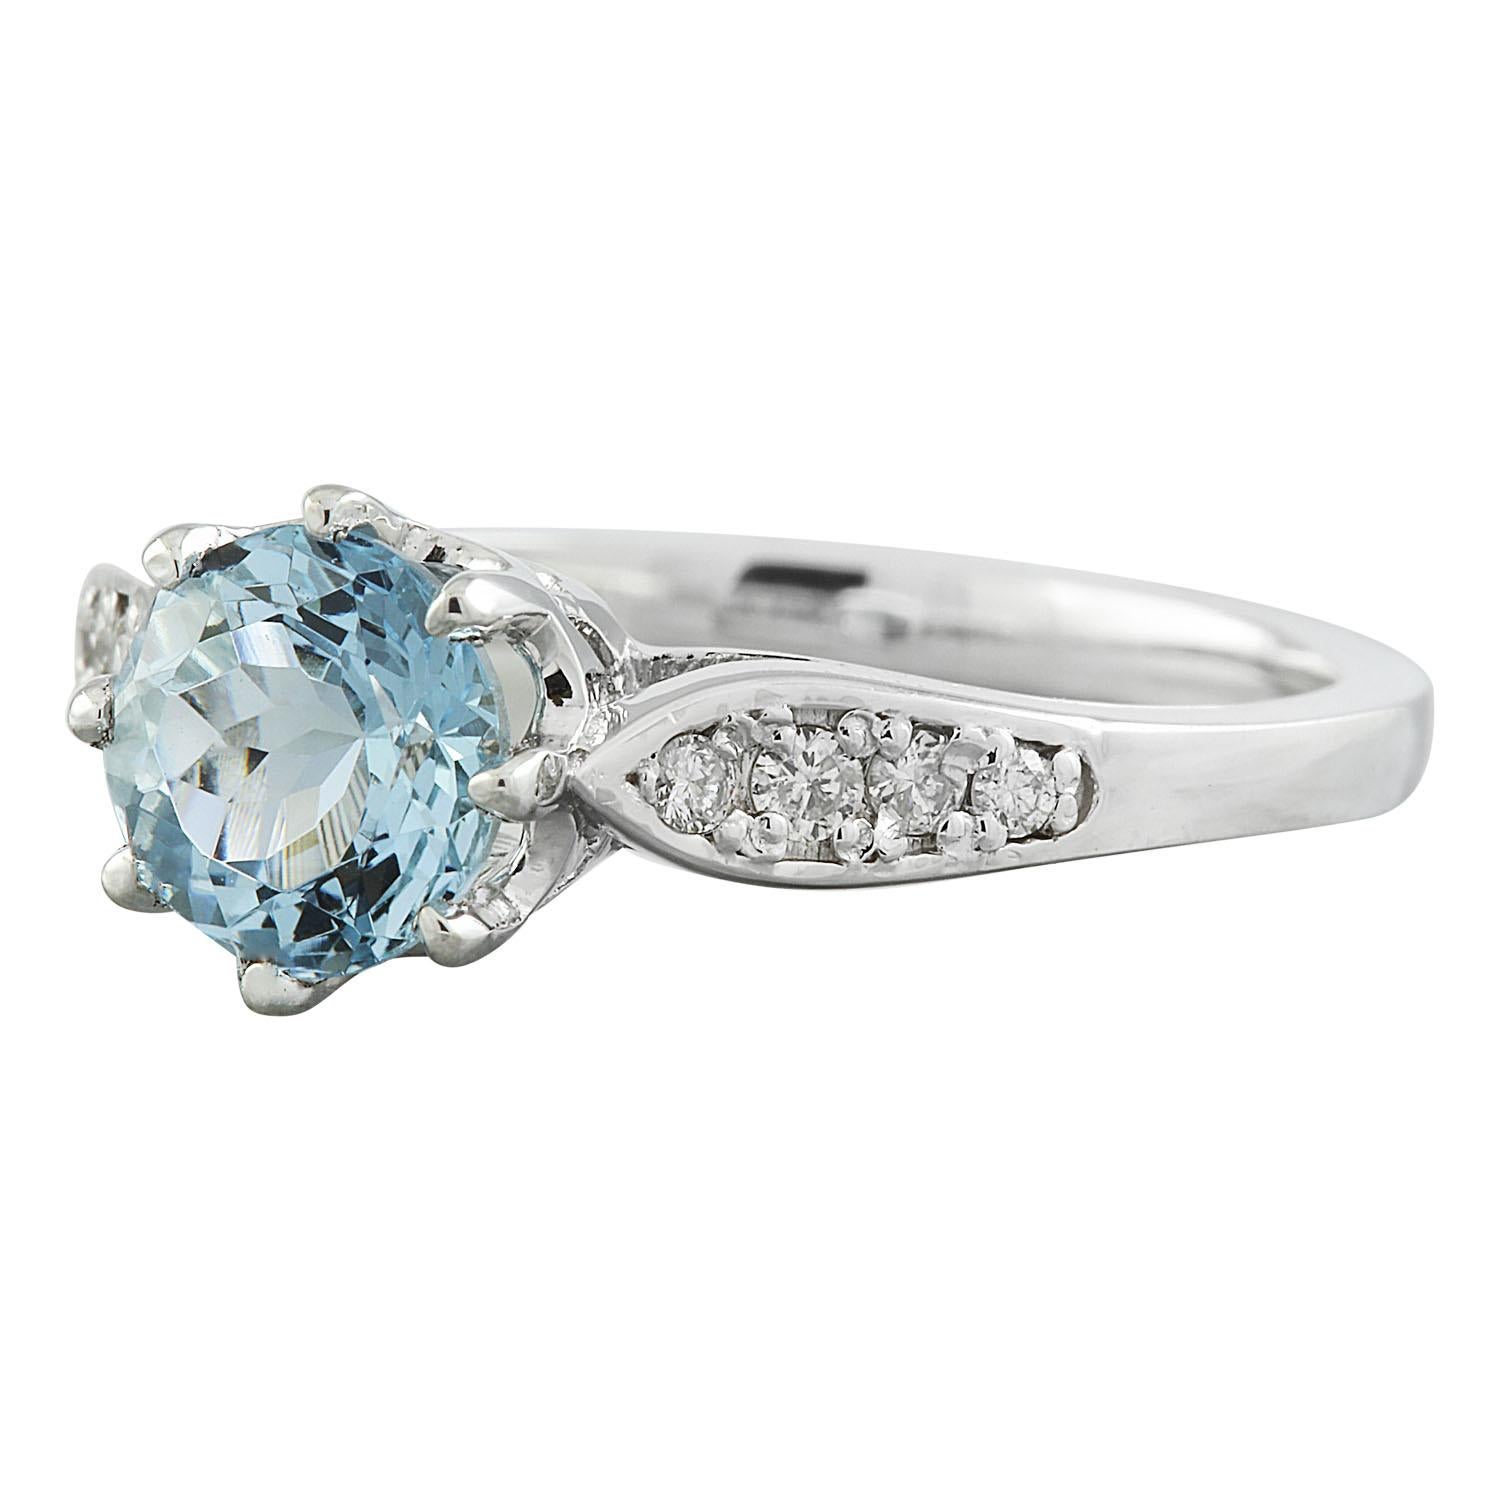 1.27 Carat Natural Aquamarine 14 Karat Solid White Gold Diamond Ring
Stamped: 14K 
Total Ring Weight: 3.1 Grams
Aquamarine Weight 1.12 Carat (7.00x7.00 Millimeters)
Diamond Weight: 0.15 carat (F-G Color, VS2-SI1 Clarity )
Face Measures: 7.00x7.00